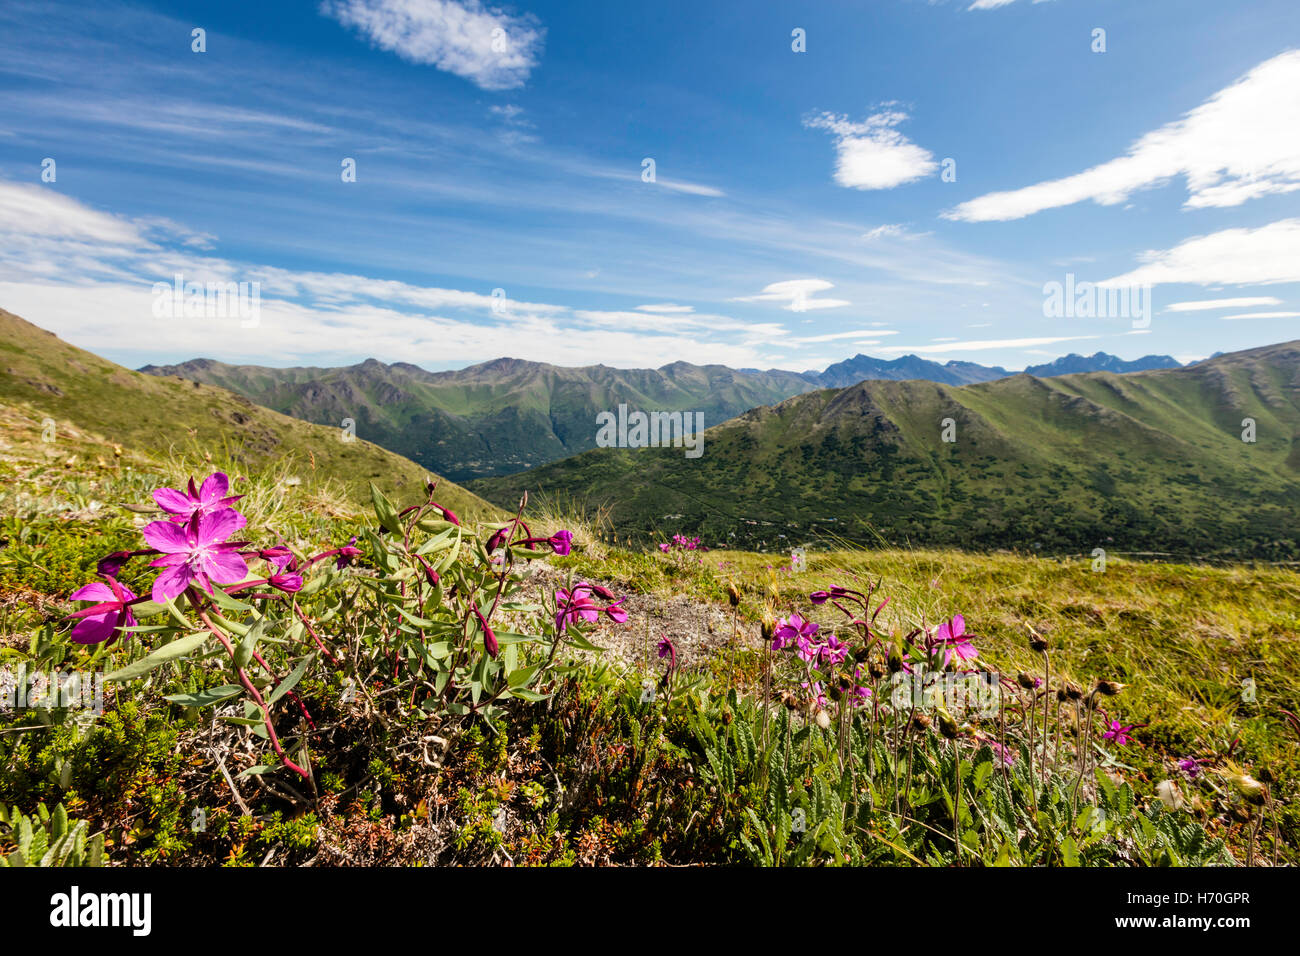 Closeup of Dwarf Fireweed and Mountain Avens overlooking South Fork Eagle River Valley in Alaska. Stock Photo